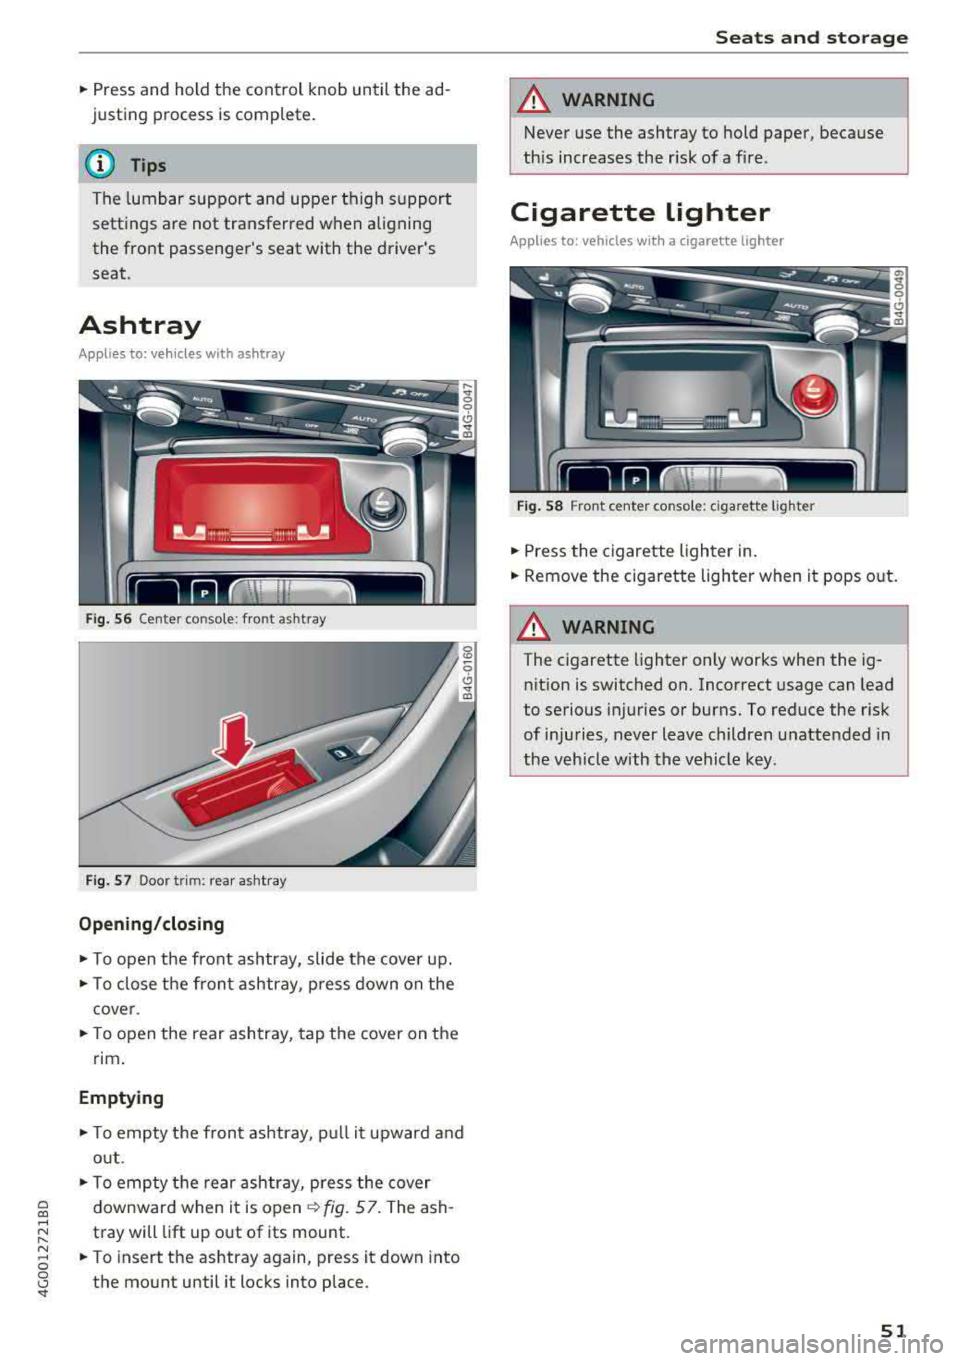 AUDI A6 2018  Owners Manual a co ,..., 
N 
" N ,..., 
0 0 <..:l <I" 
• Press  and  hold  the  control  knob  until  the  ad­
justing  proc ess  is complete. 
(D T ips 
The  lumbar  support  and  upper  thigh  support 
settin